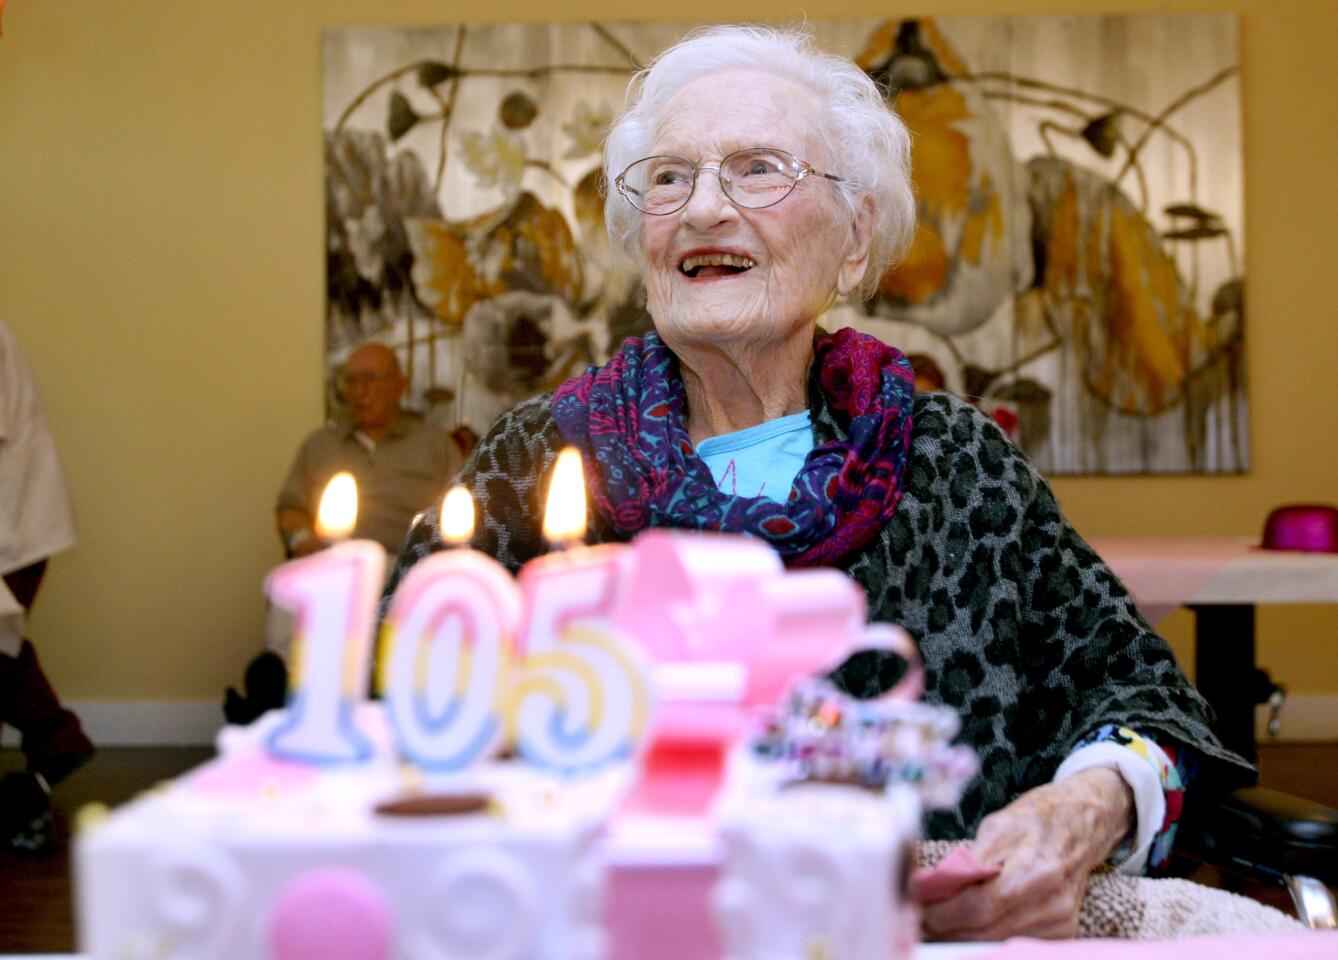 Helen Broderson celebrates her 105th birthday with a cake and friends at Autumn Hills Health Care Center in Glendale on Wednesday, Feb. 3, 2016. Broderson was born in Rockford, Ill., on Feb. 3, 1911 and has lived in Glendale since the late 1950's.